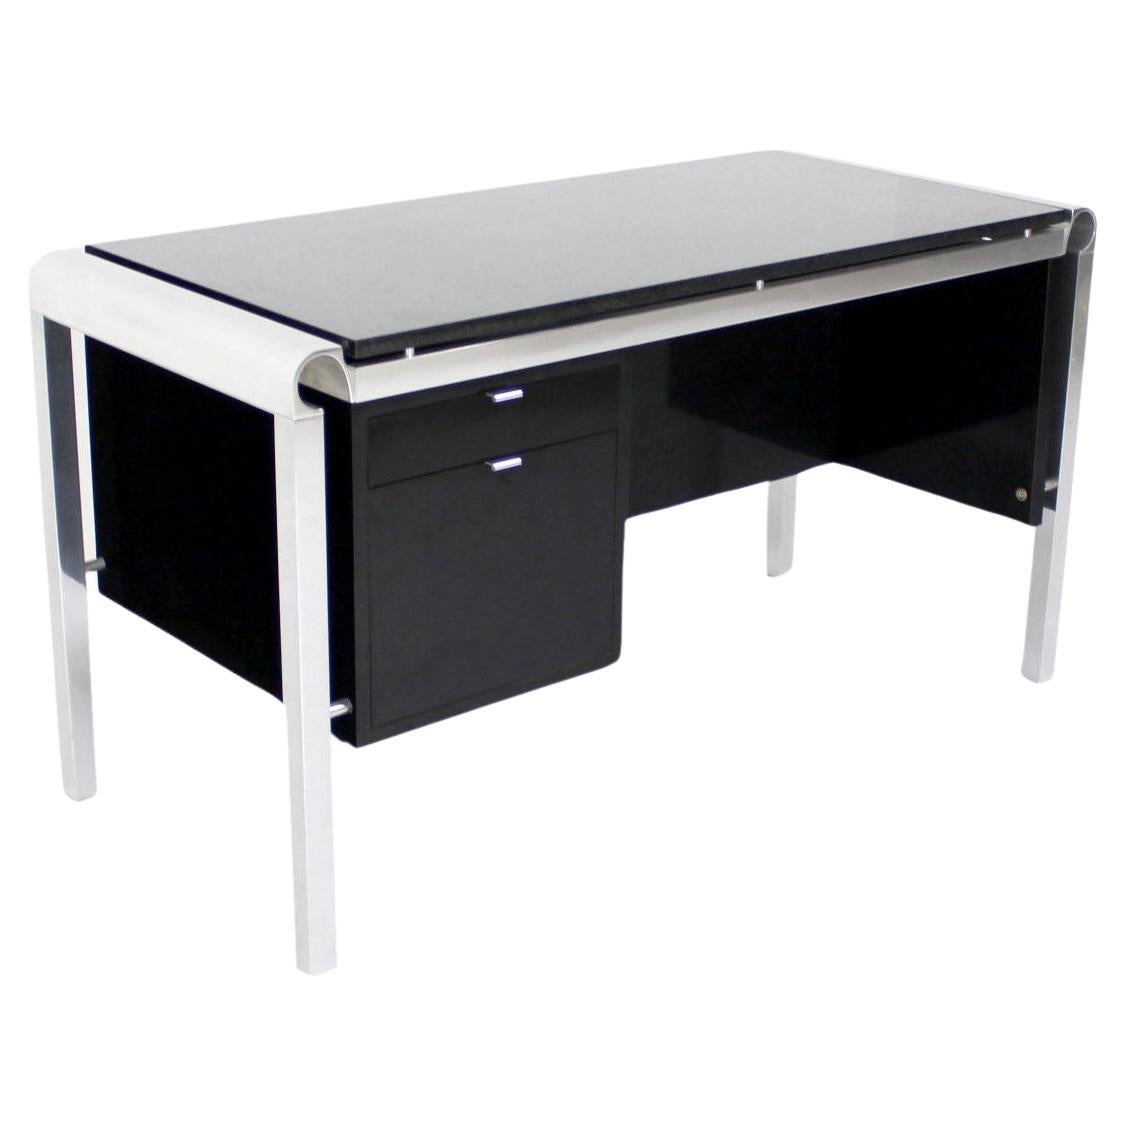 Pace Collection Mid Century Italian Modern Thick Black Marble Granite Top Desk